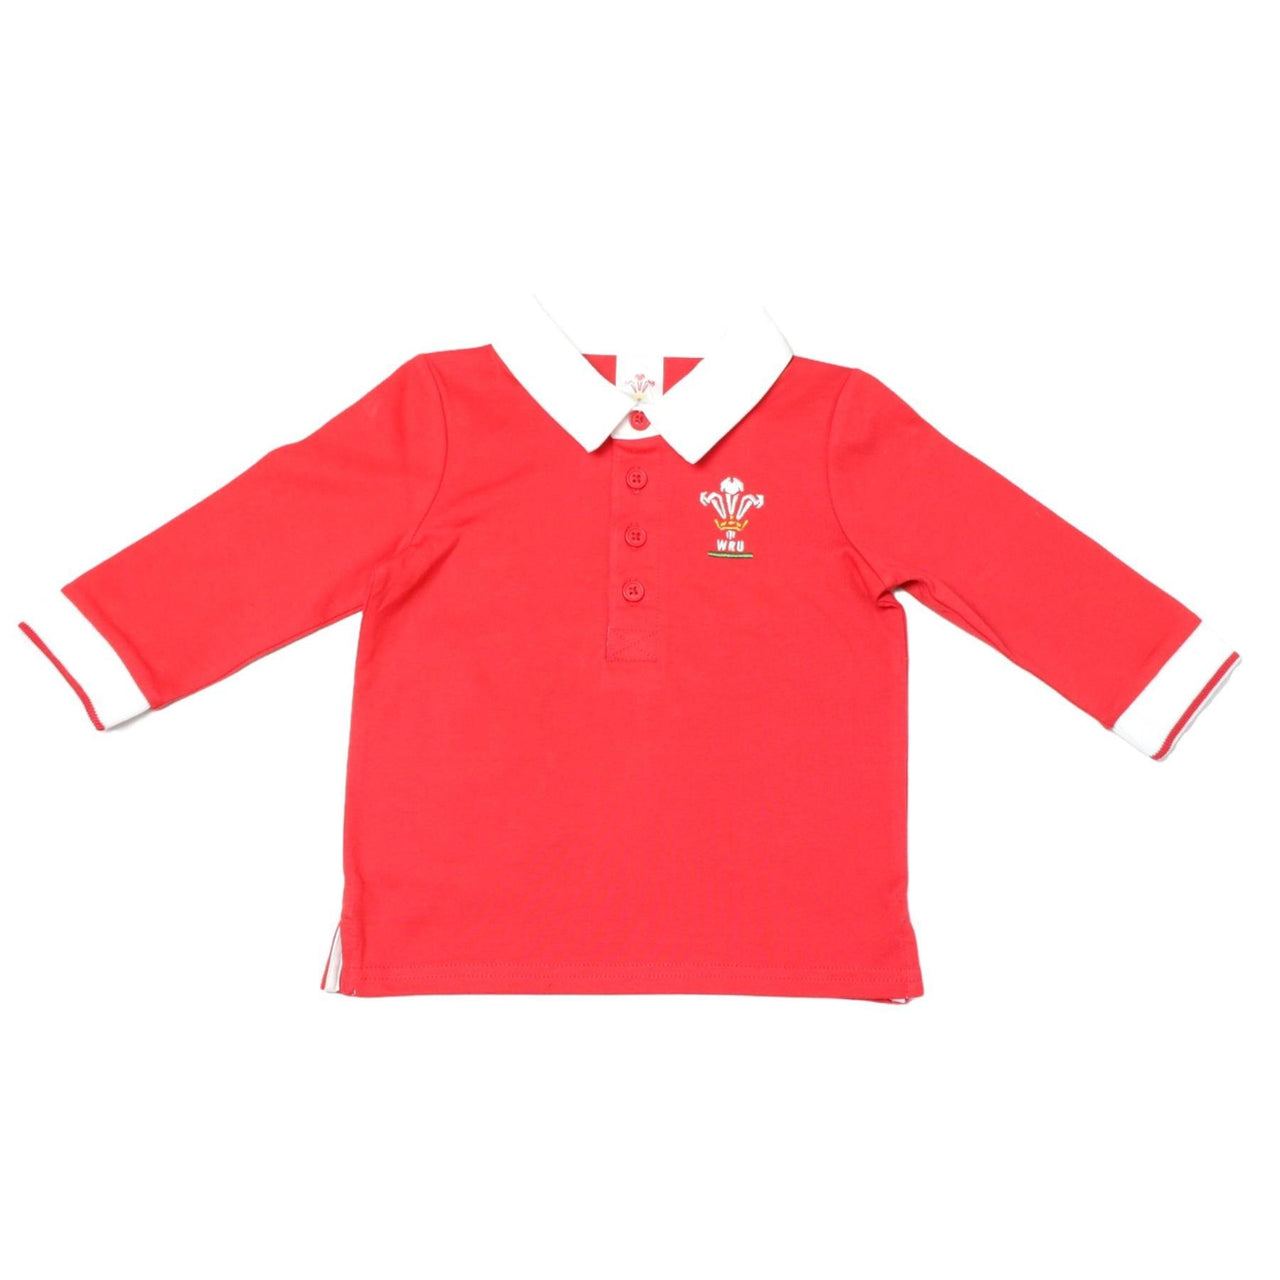 Wales WRU Rugby Baby/Toddler Long Sleeved Shirt | Red | 2021/23